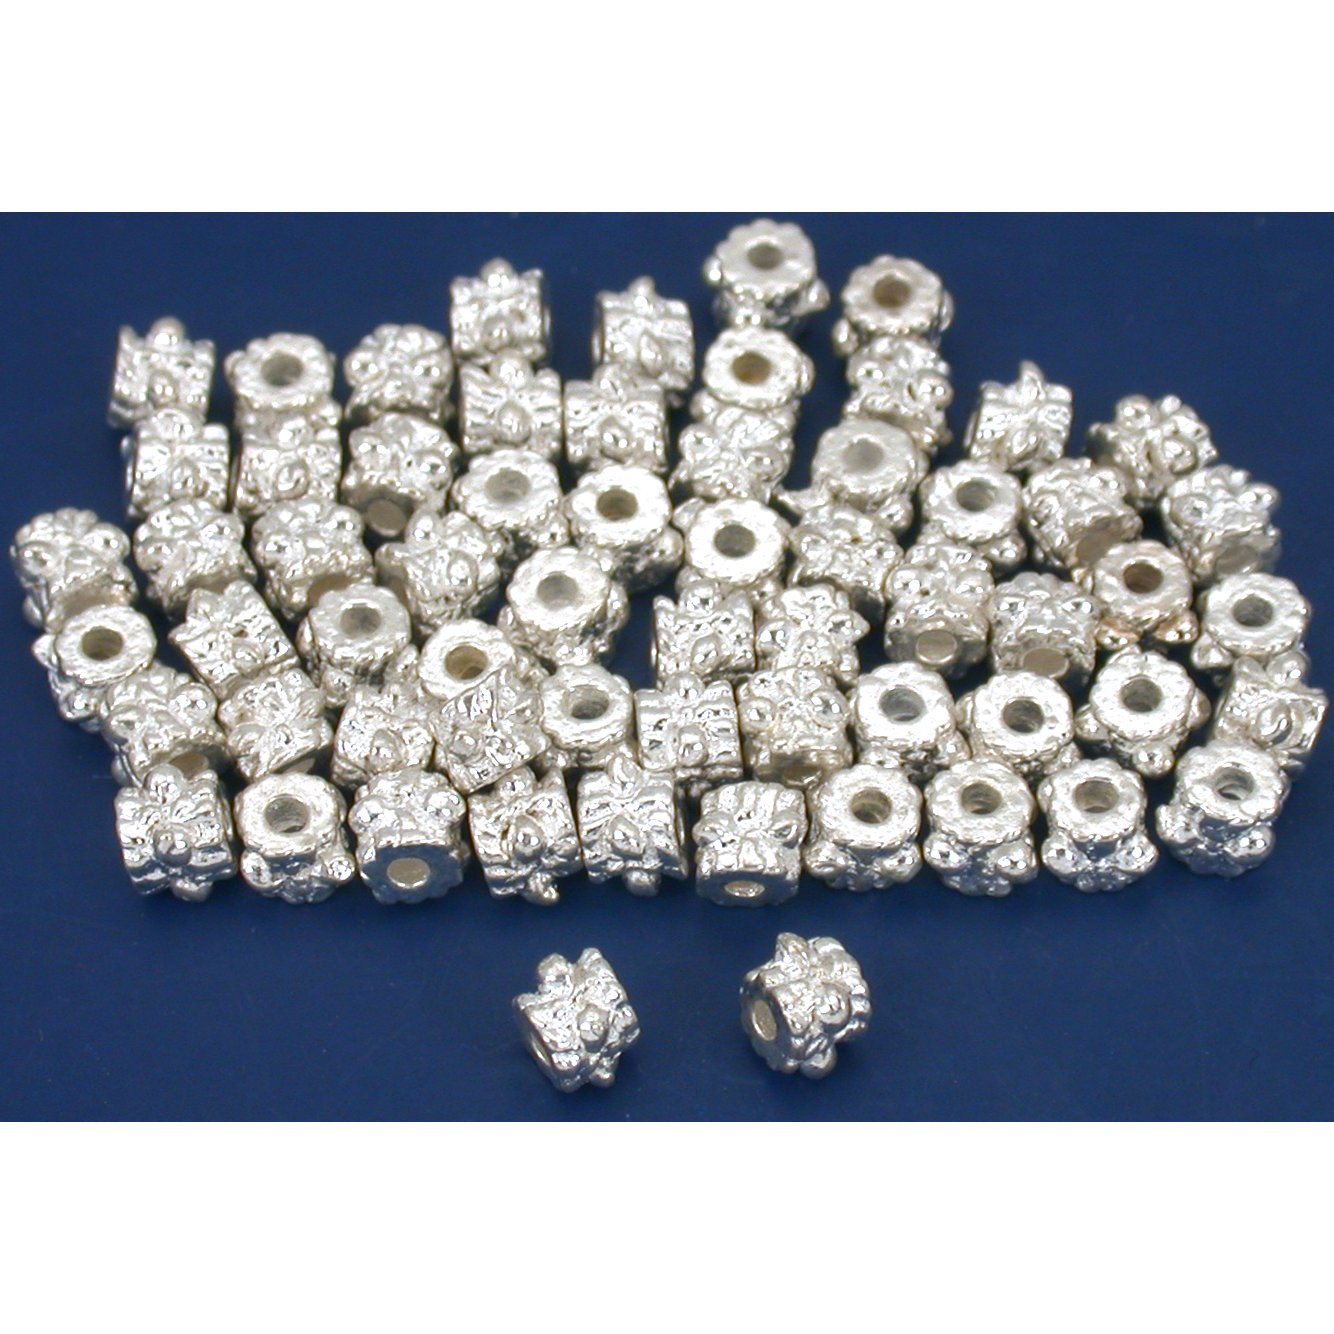 Bali Tube Beads Silver Plated 3.5mm 60Pcs Approx.